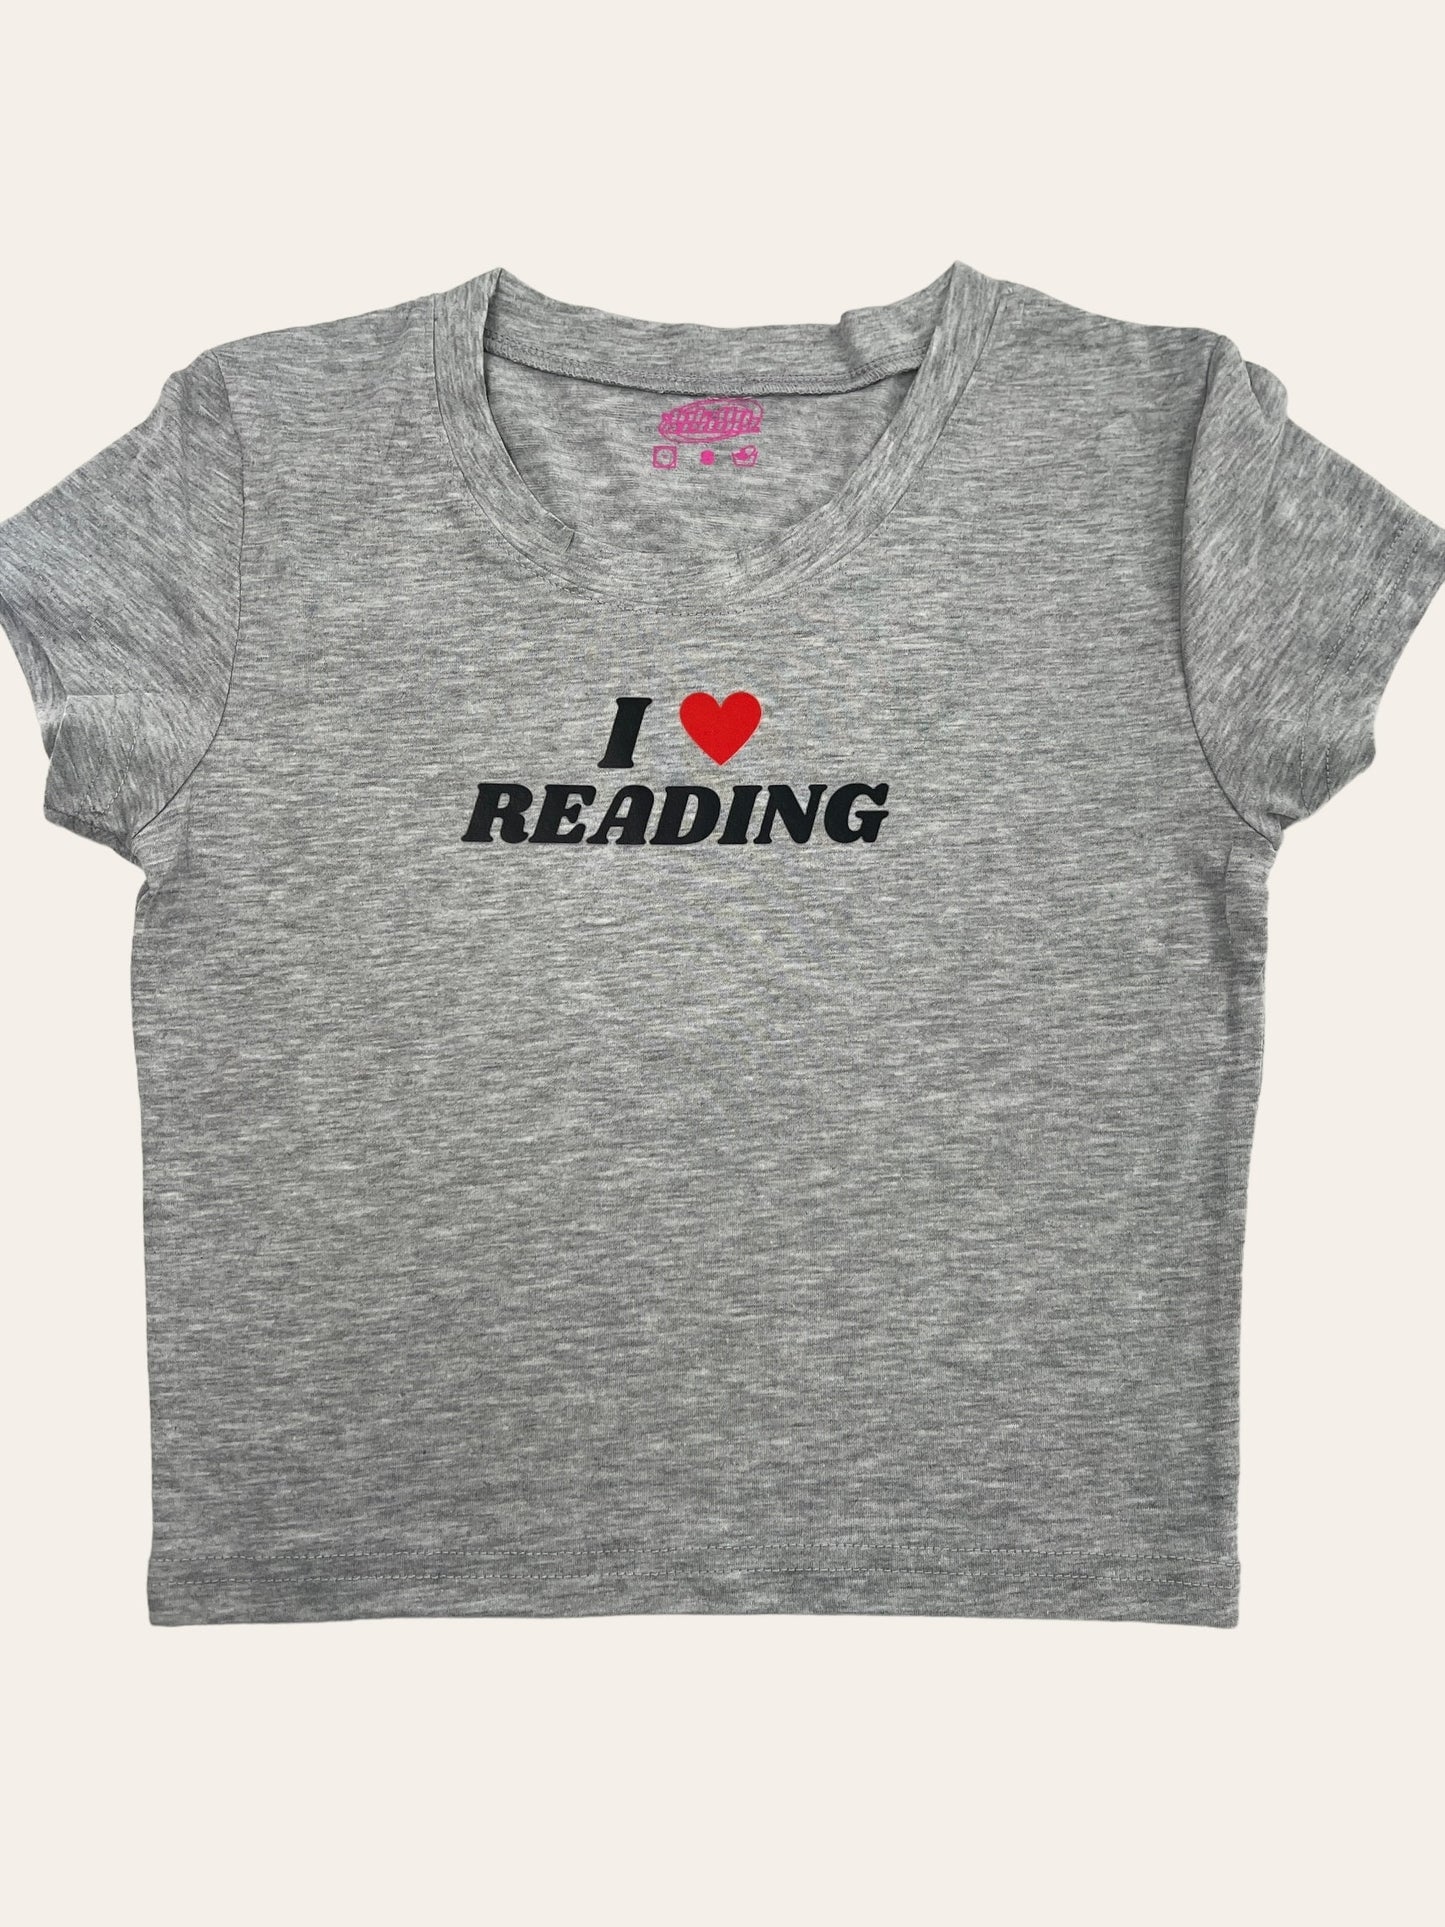 a t - shirt that says i love reading